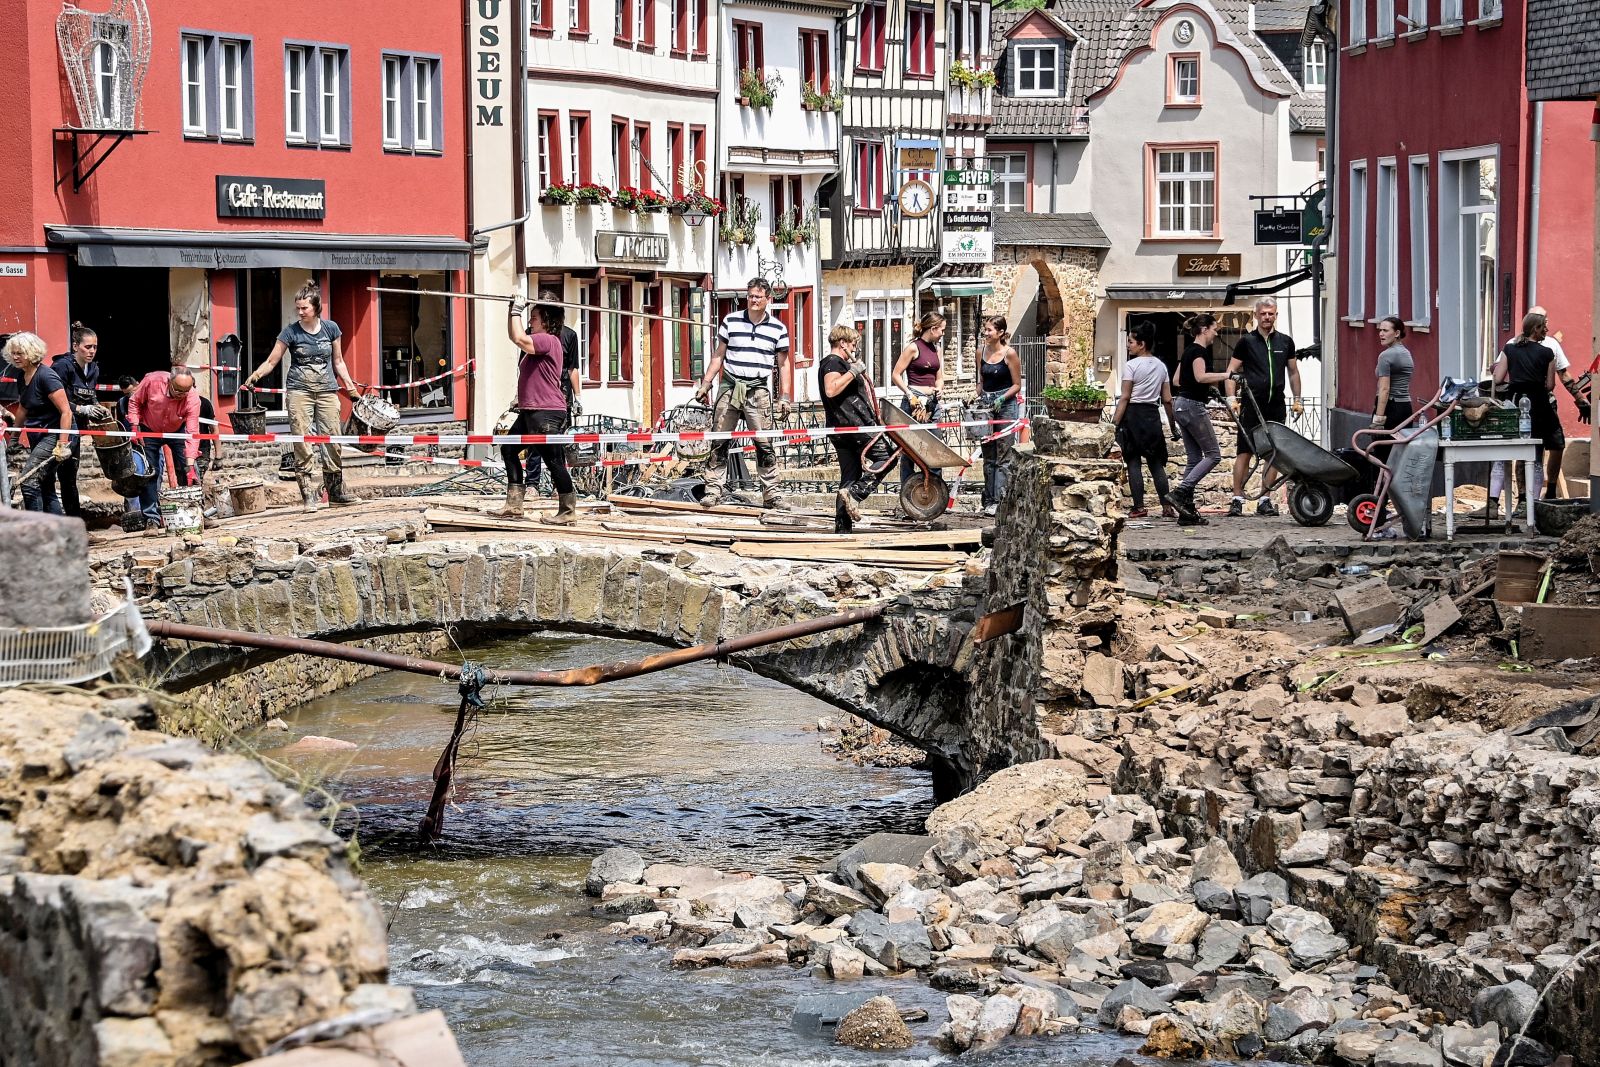 epa09356199 Residents clear debris out of the way after heavy flooding of the river Erft caused severe destruction in the village of Bad Muenstereifel, Euskirchen district, Germany, 20 July 2021 (issued 21 July 2021). Large parts of western Germany and central Europe were hit by flash floods in the night of 14 to 15 July, following days of continuous rain that destroyed buildings and swept away cars. The total number of victims in the flood disaster in western Germany rises to at least 170, with many hundreds still missing.  EPA/SASCHA STEINBACH